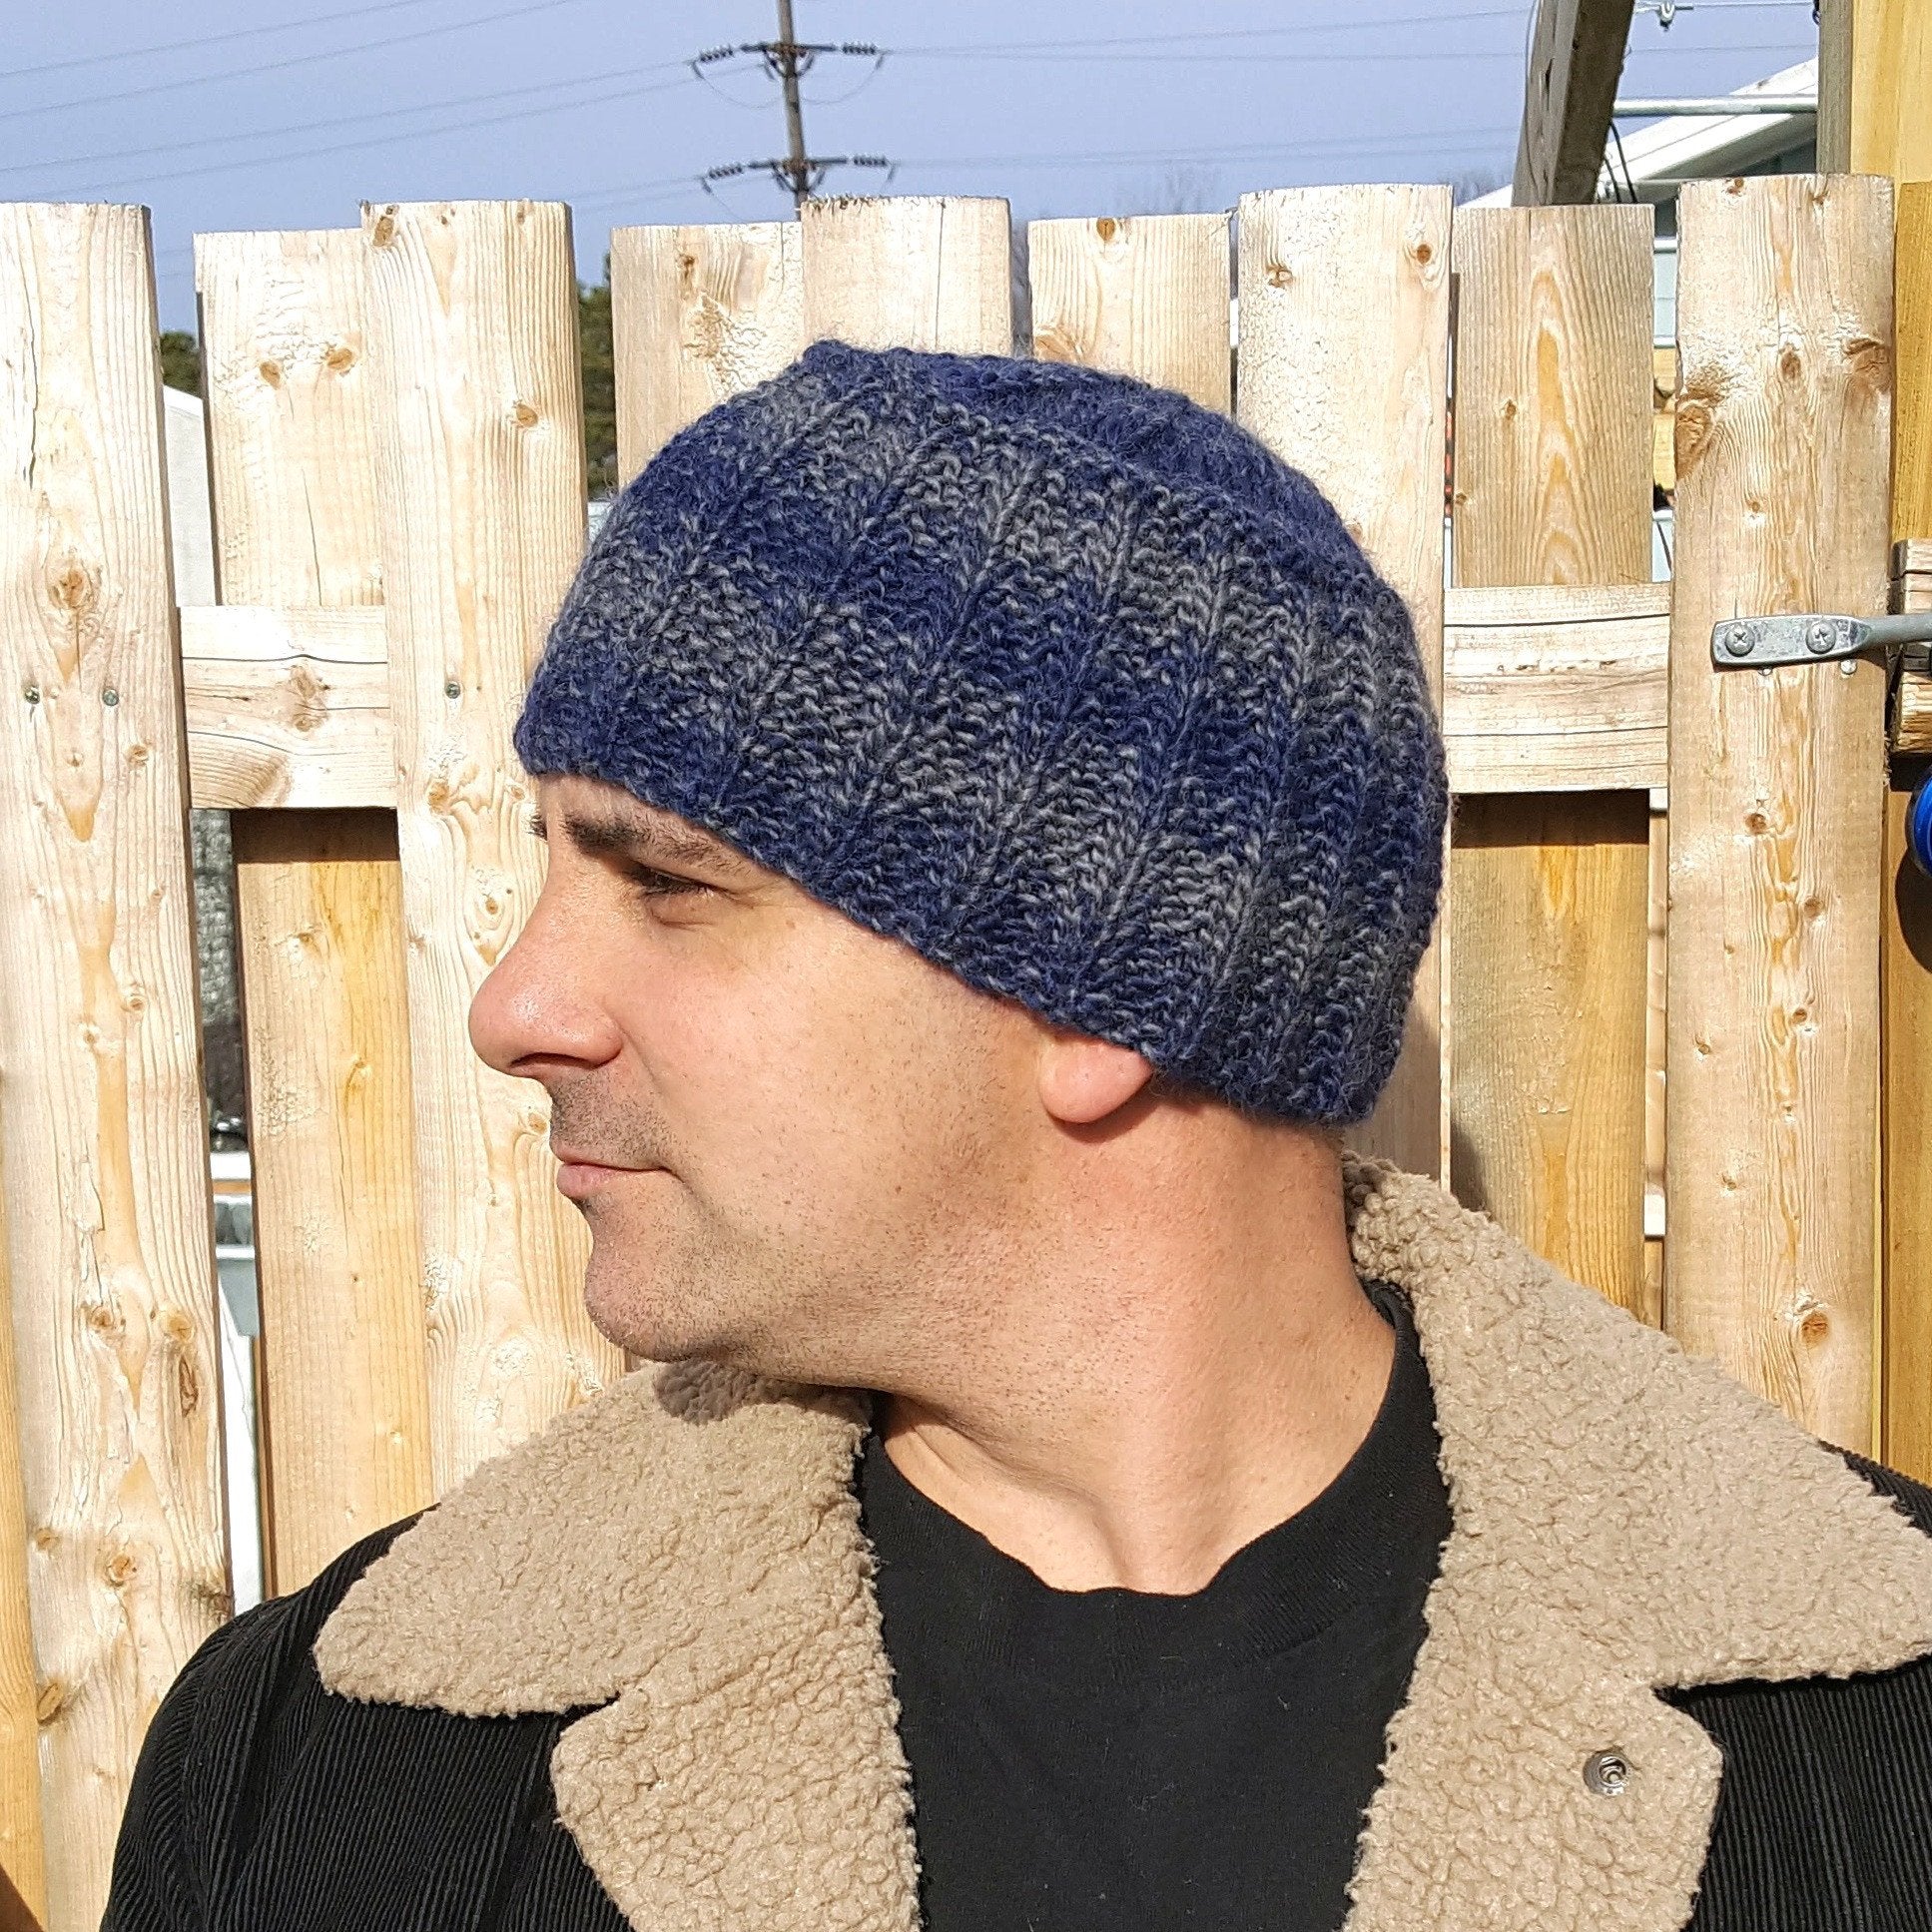 Stormy Night Knit Beanie-Accessories-in2ition mercantile